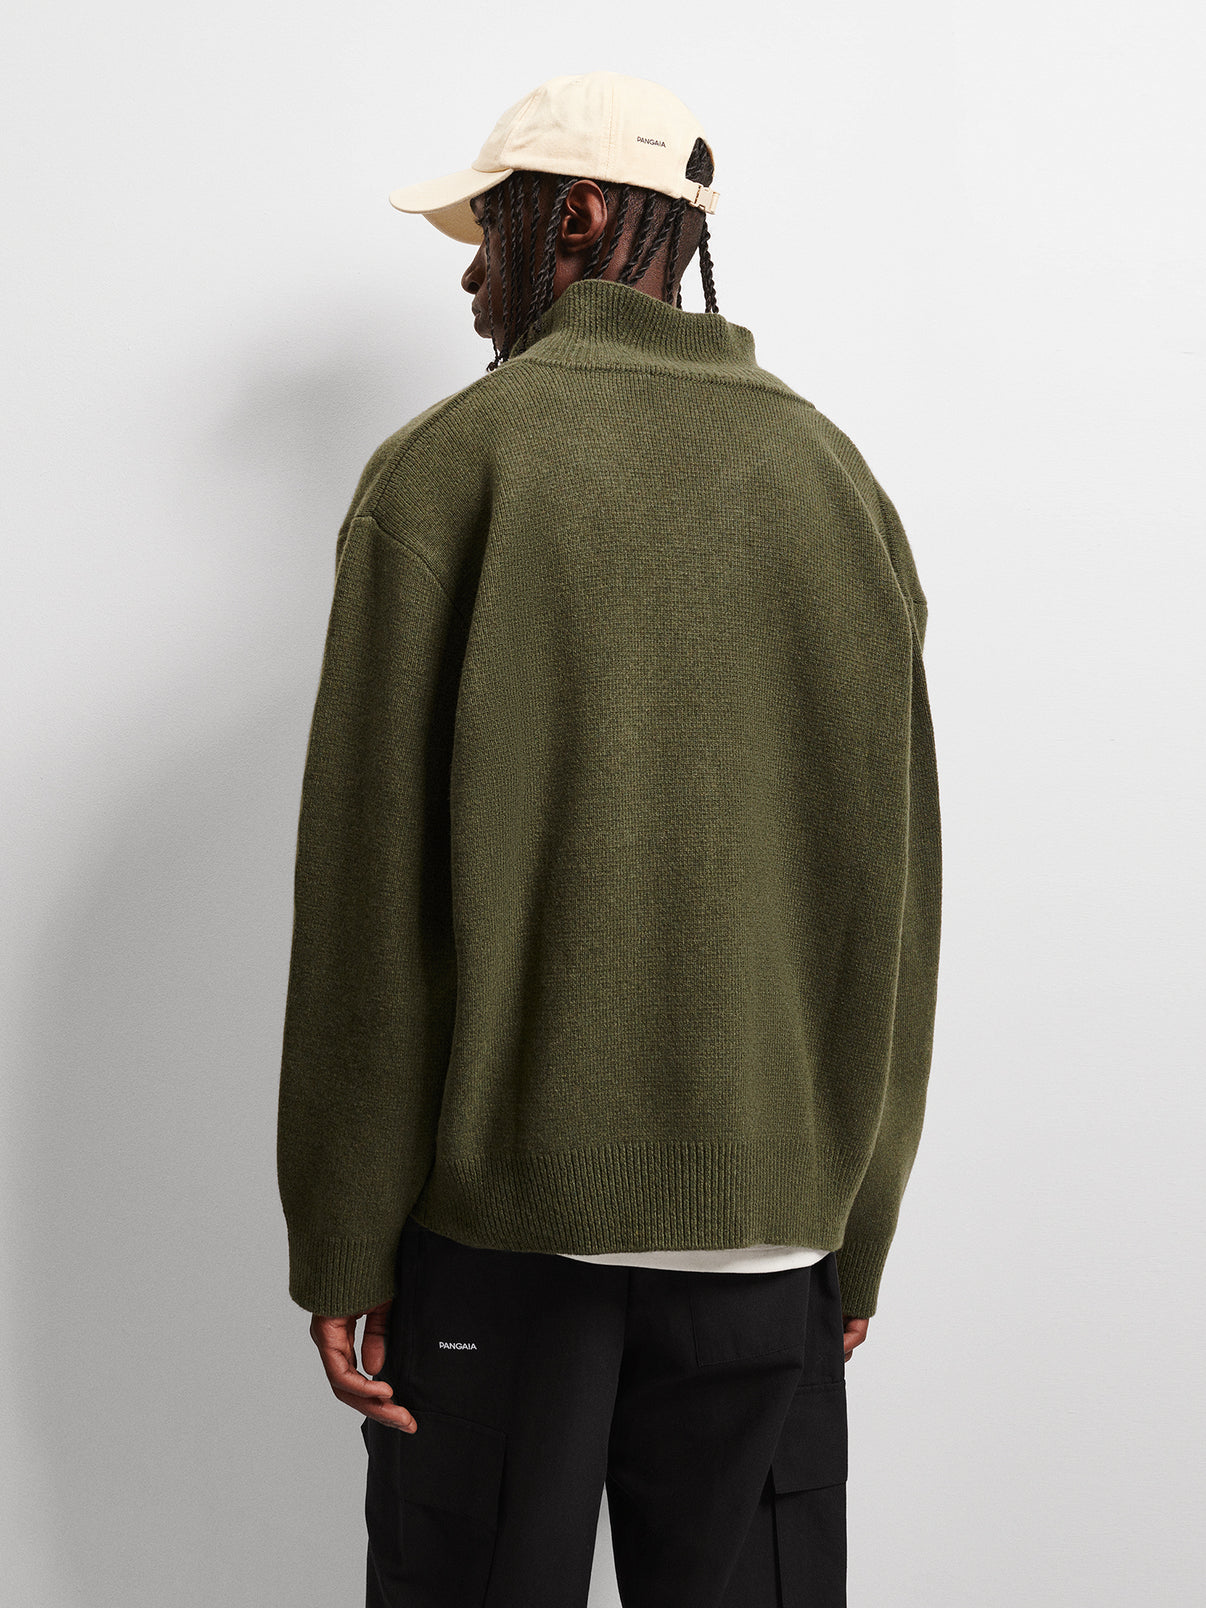 Men's Green Recycled Cashmere Zip Up Sweater | Pangaia